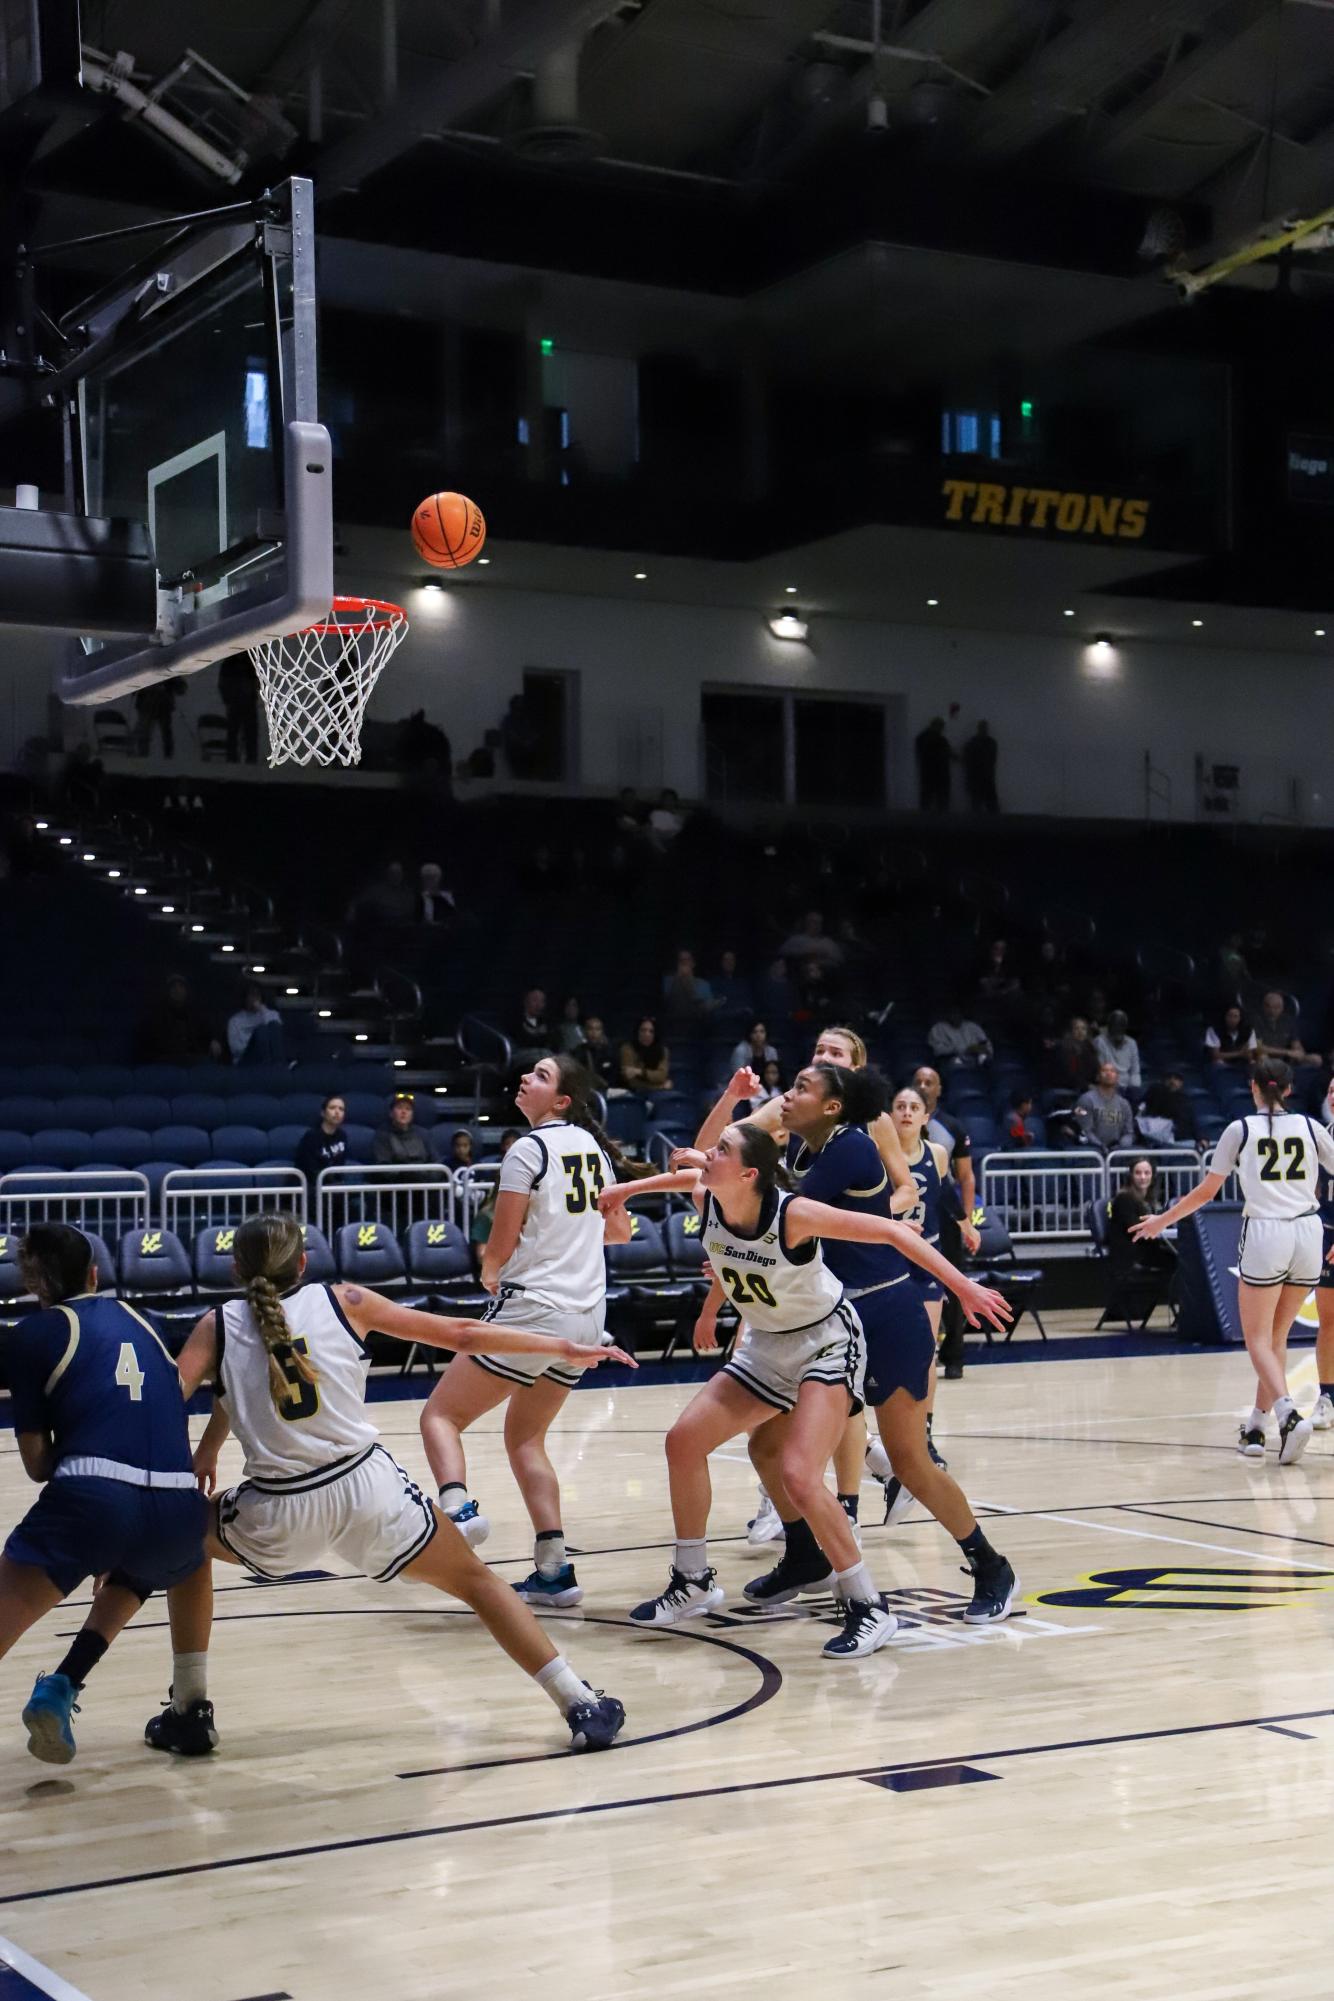 Tritons in tailspin, fall by double digits to Aggies